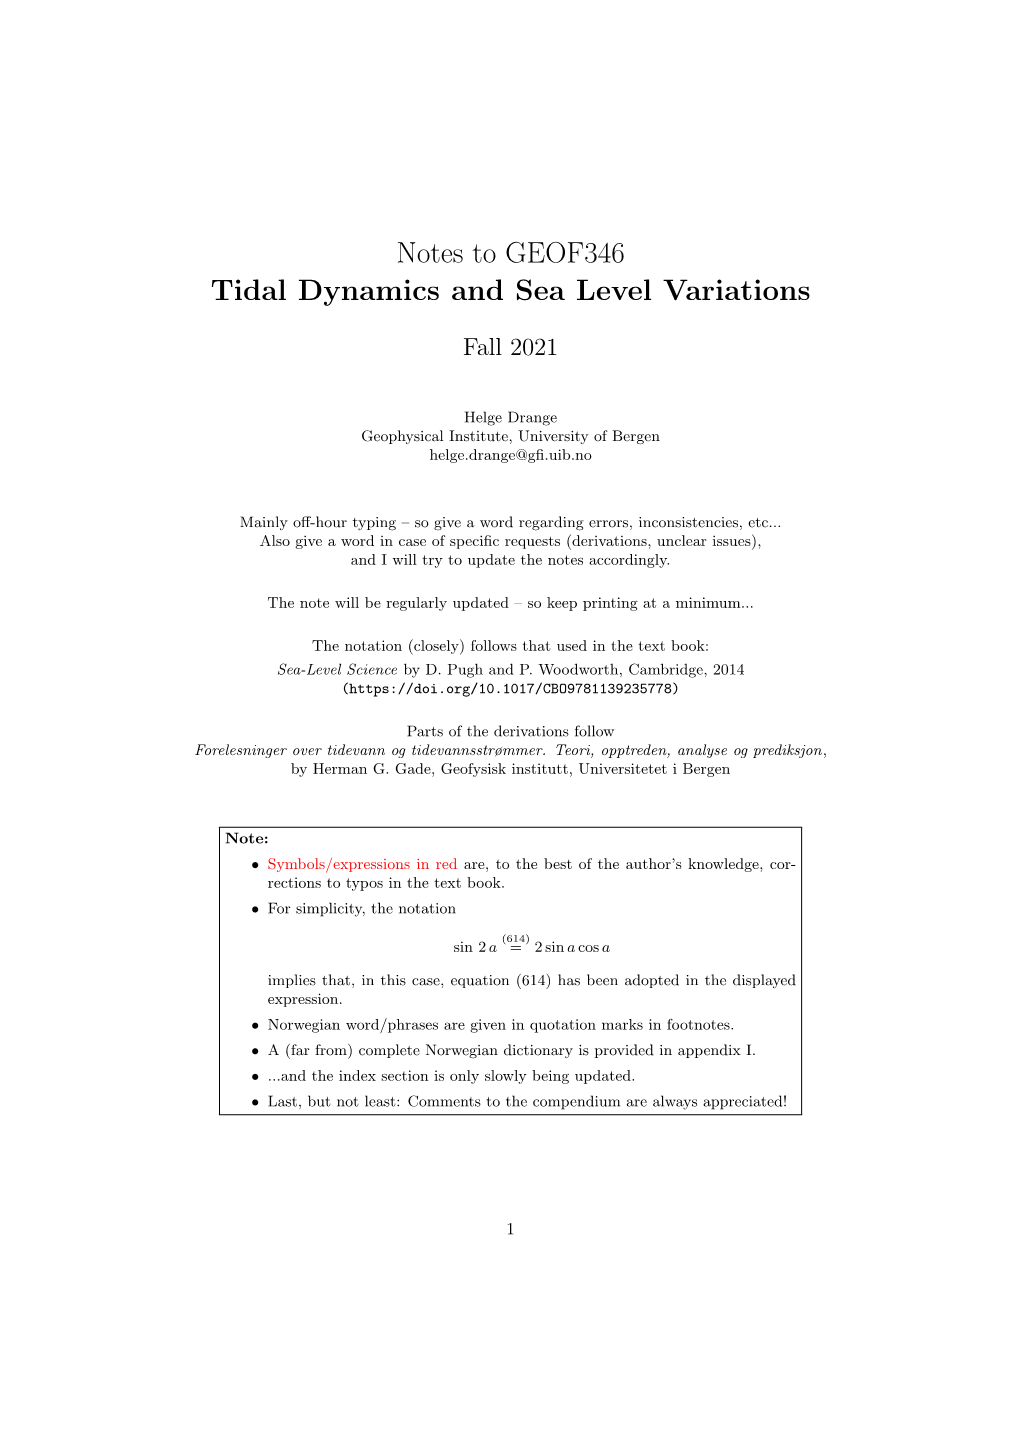 Notes to GEOF346 Tidal Dynamics and Sea Level Variations